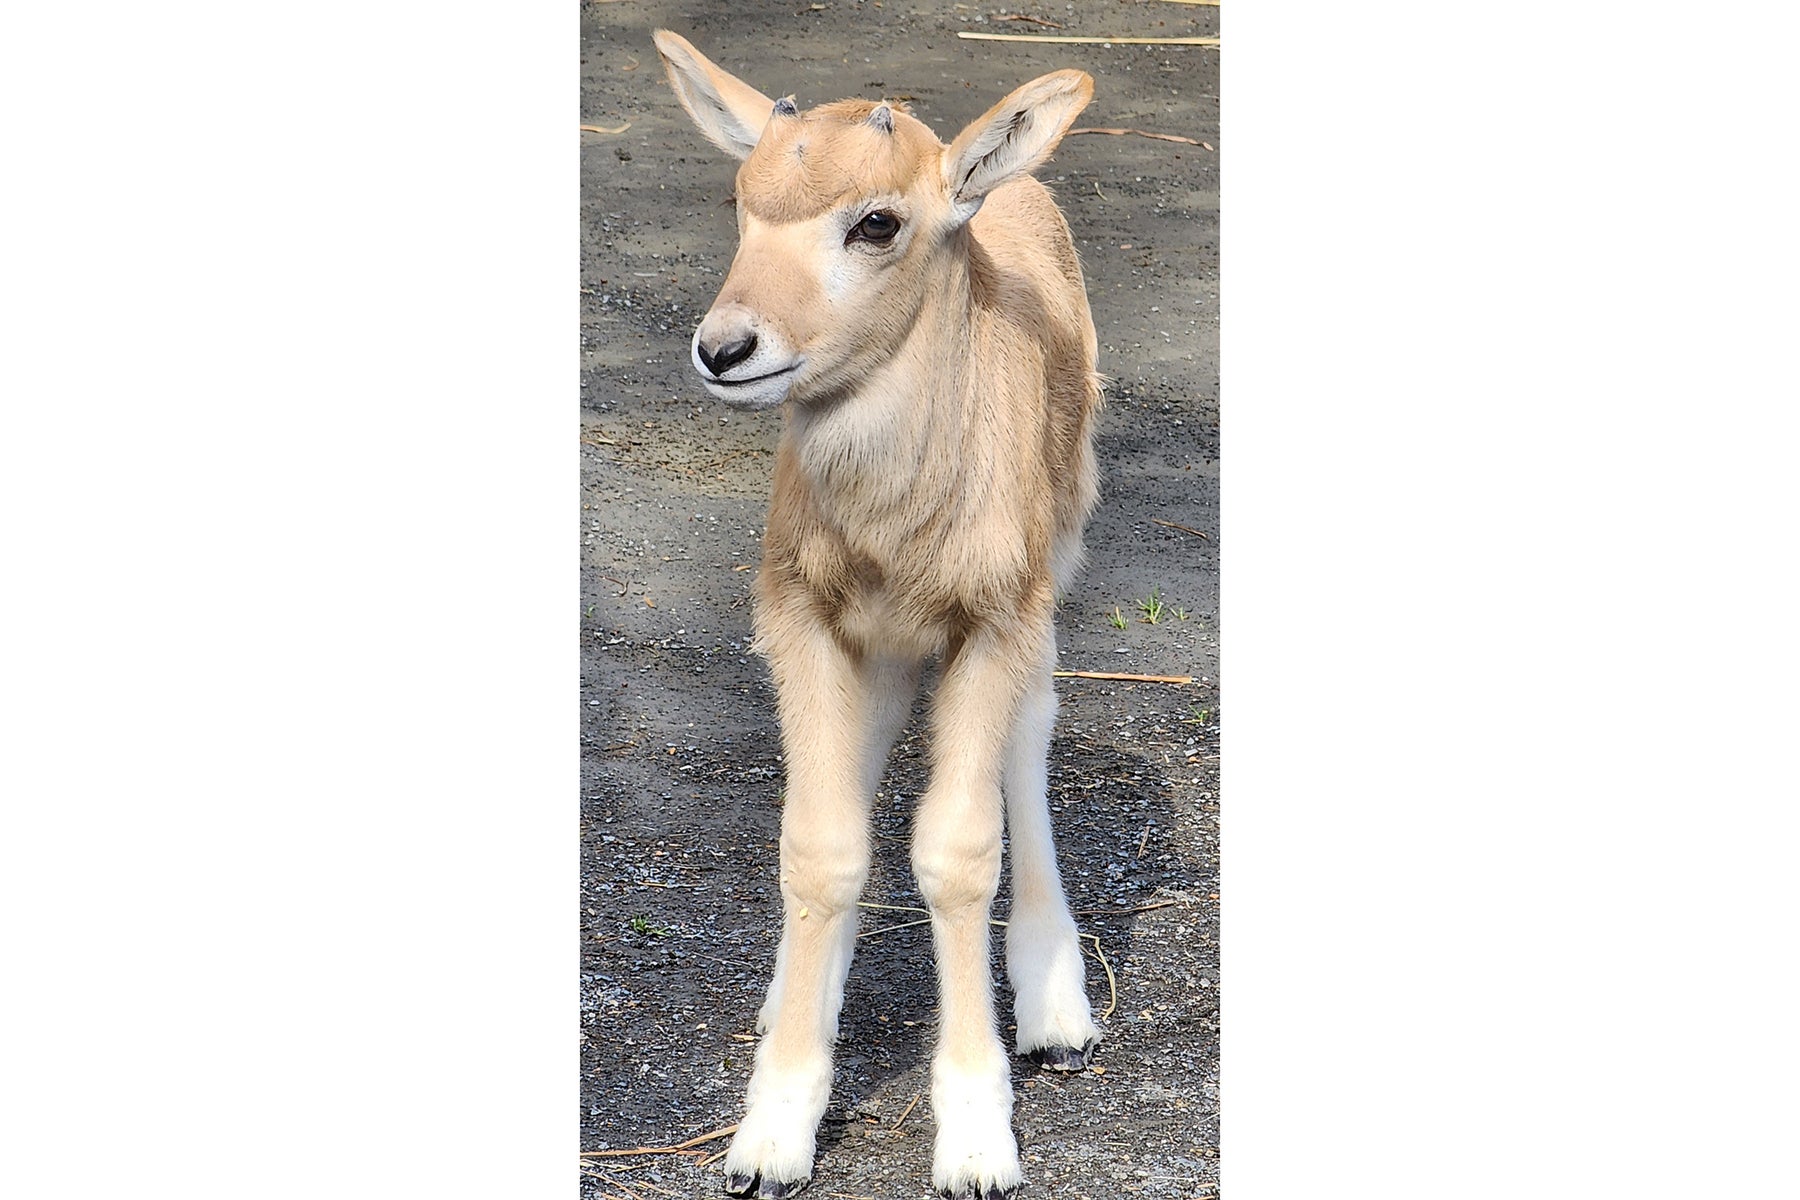 An addax calf walks through the Africa Trail habitat. Addax are stocky, sturdy antelopes with short, slender legs and short tails. The calf has two small horns on the top of her head. She has a tan coat and white facial blazes that resemble an ‘x’ running between her eyes.